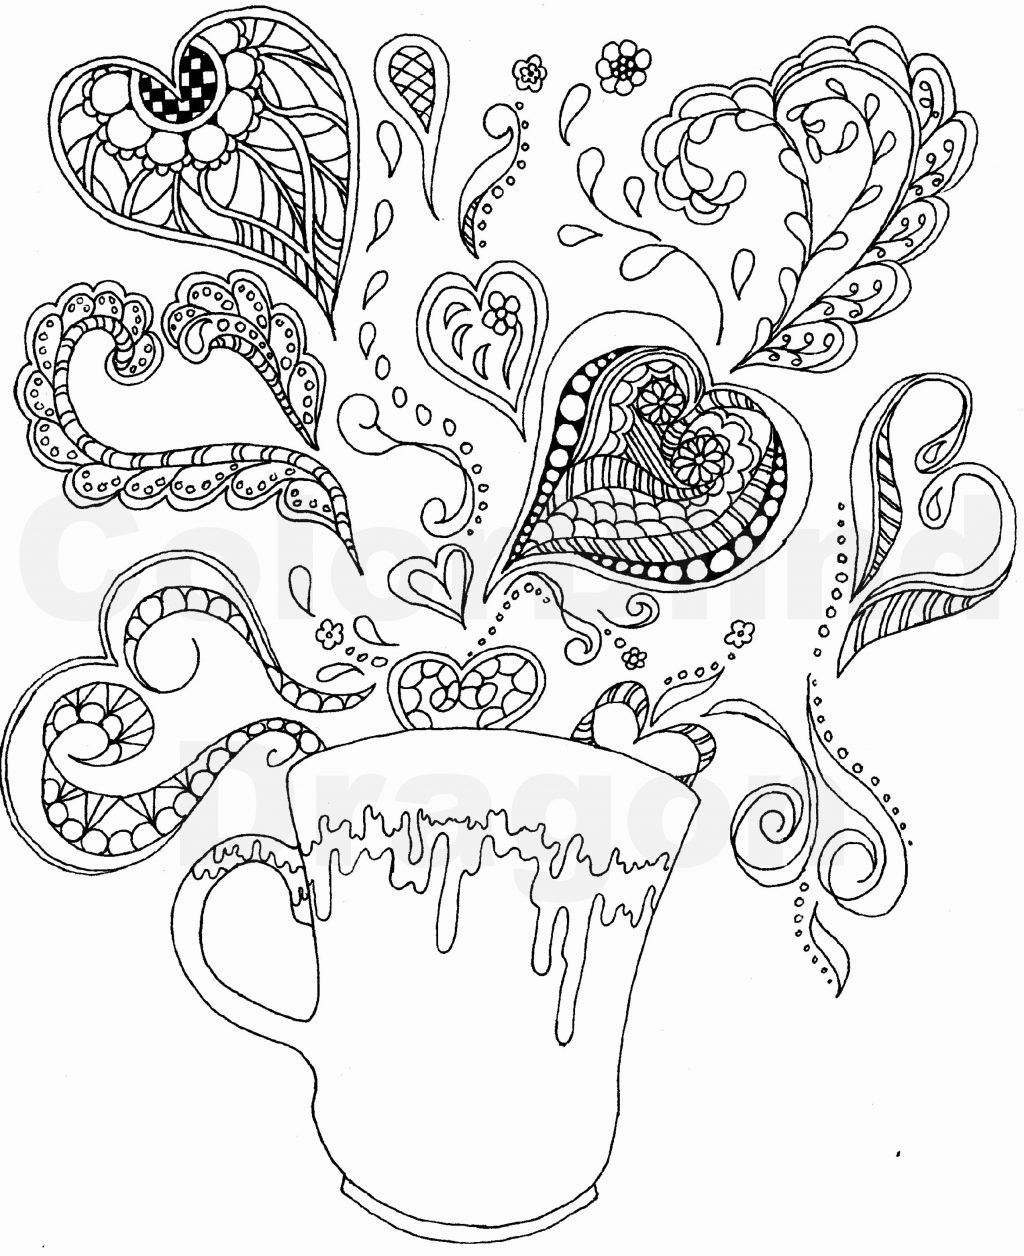 Mandala Coloring Pages For Adults Coloring Pages Free Printable Mandala Coloring Pages For Adults